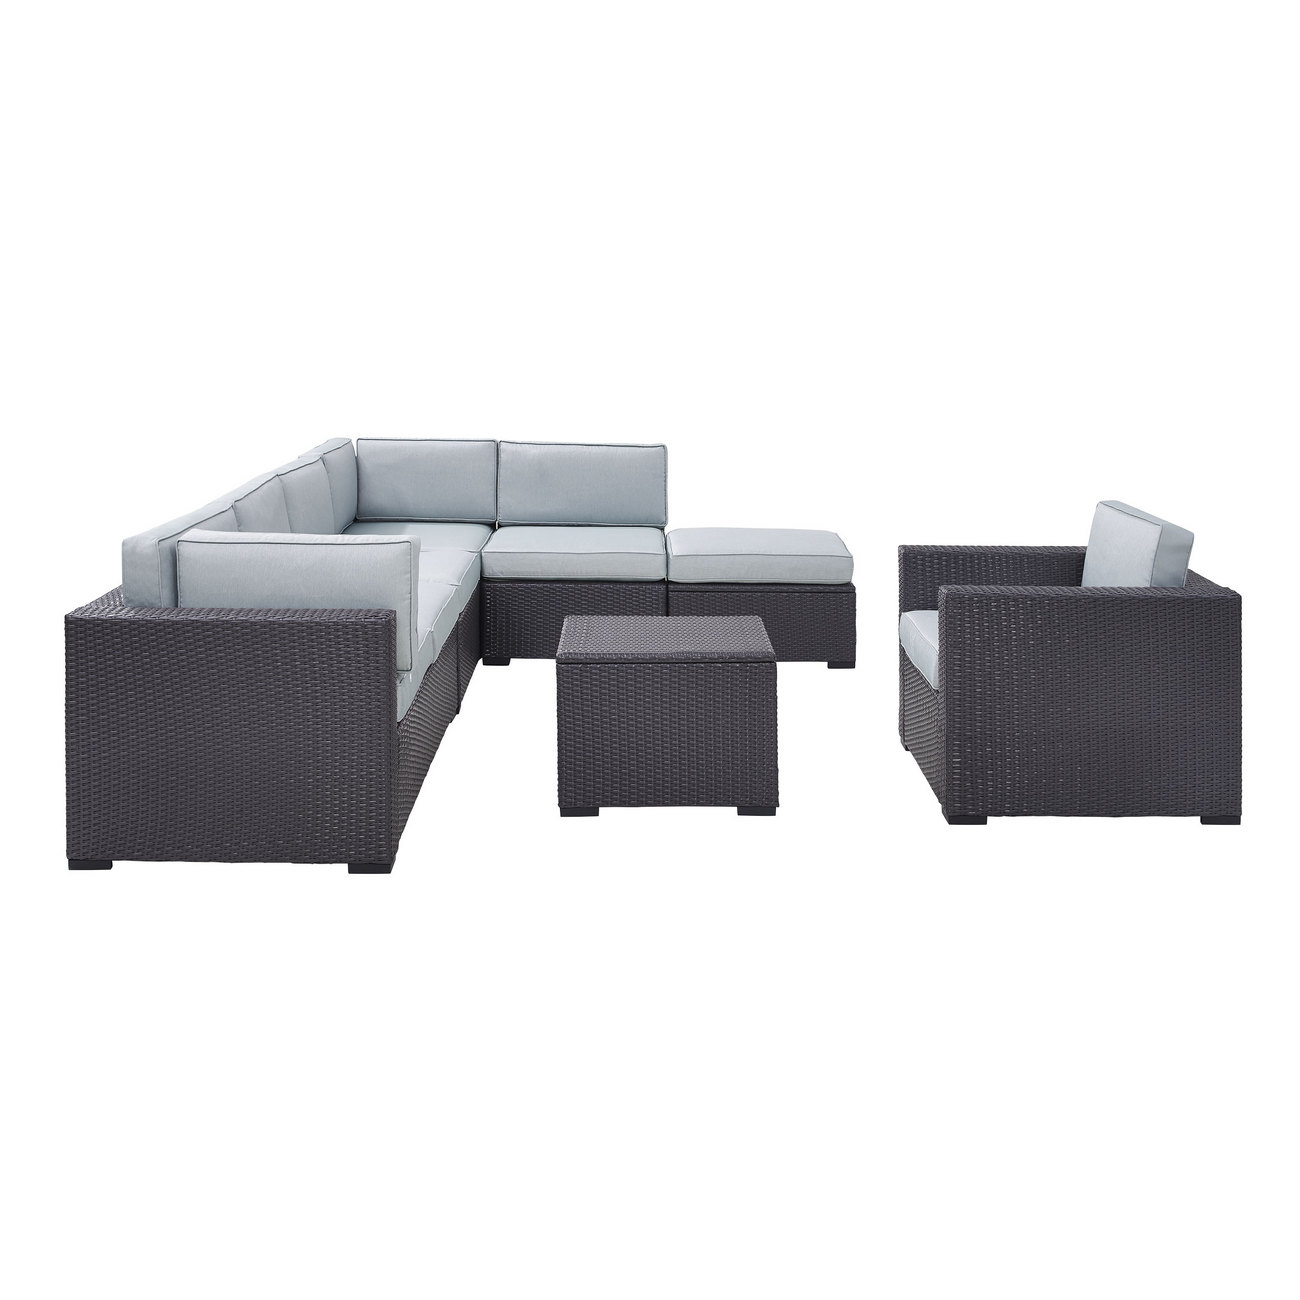 Outdoor Sectional Set Chair Armchair Coffee Table Ottoman Loves